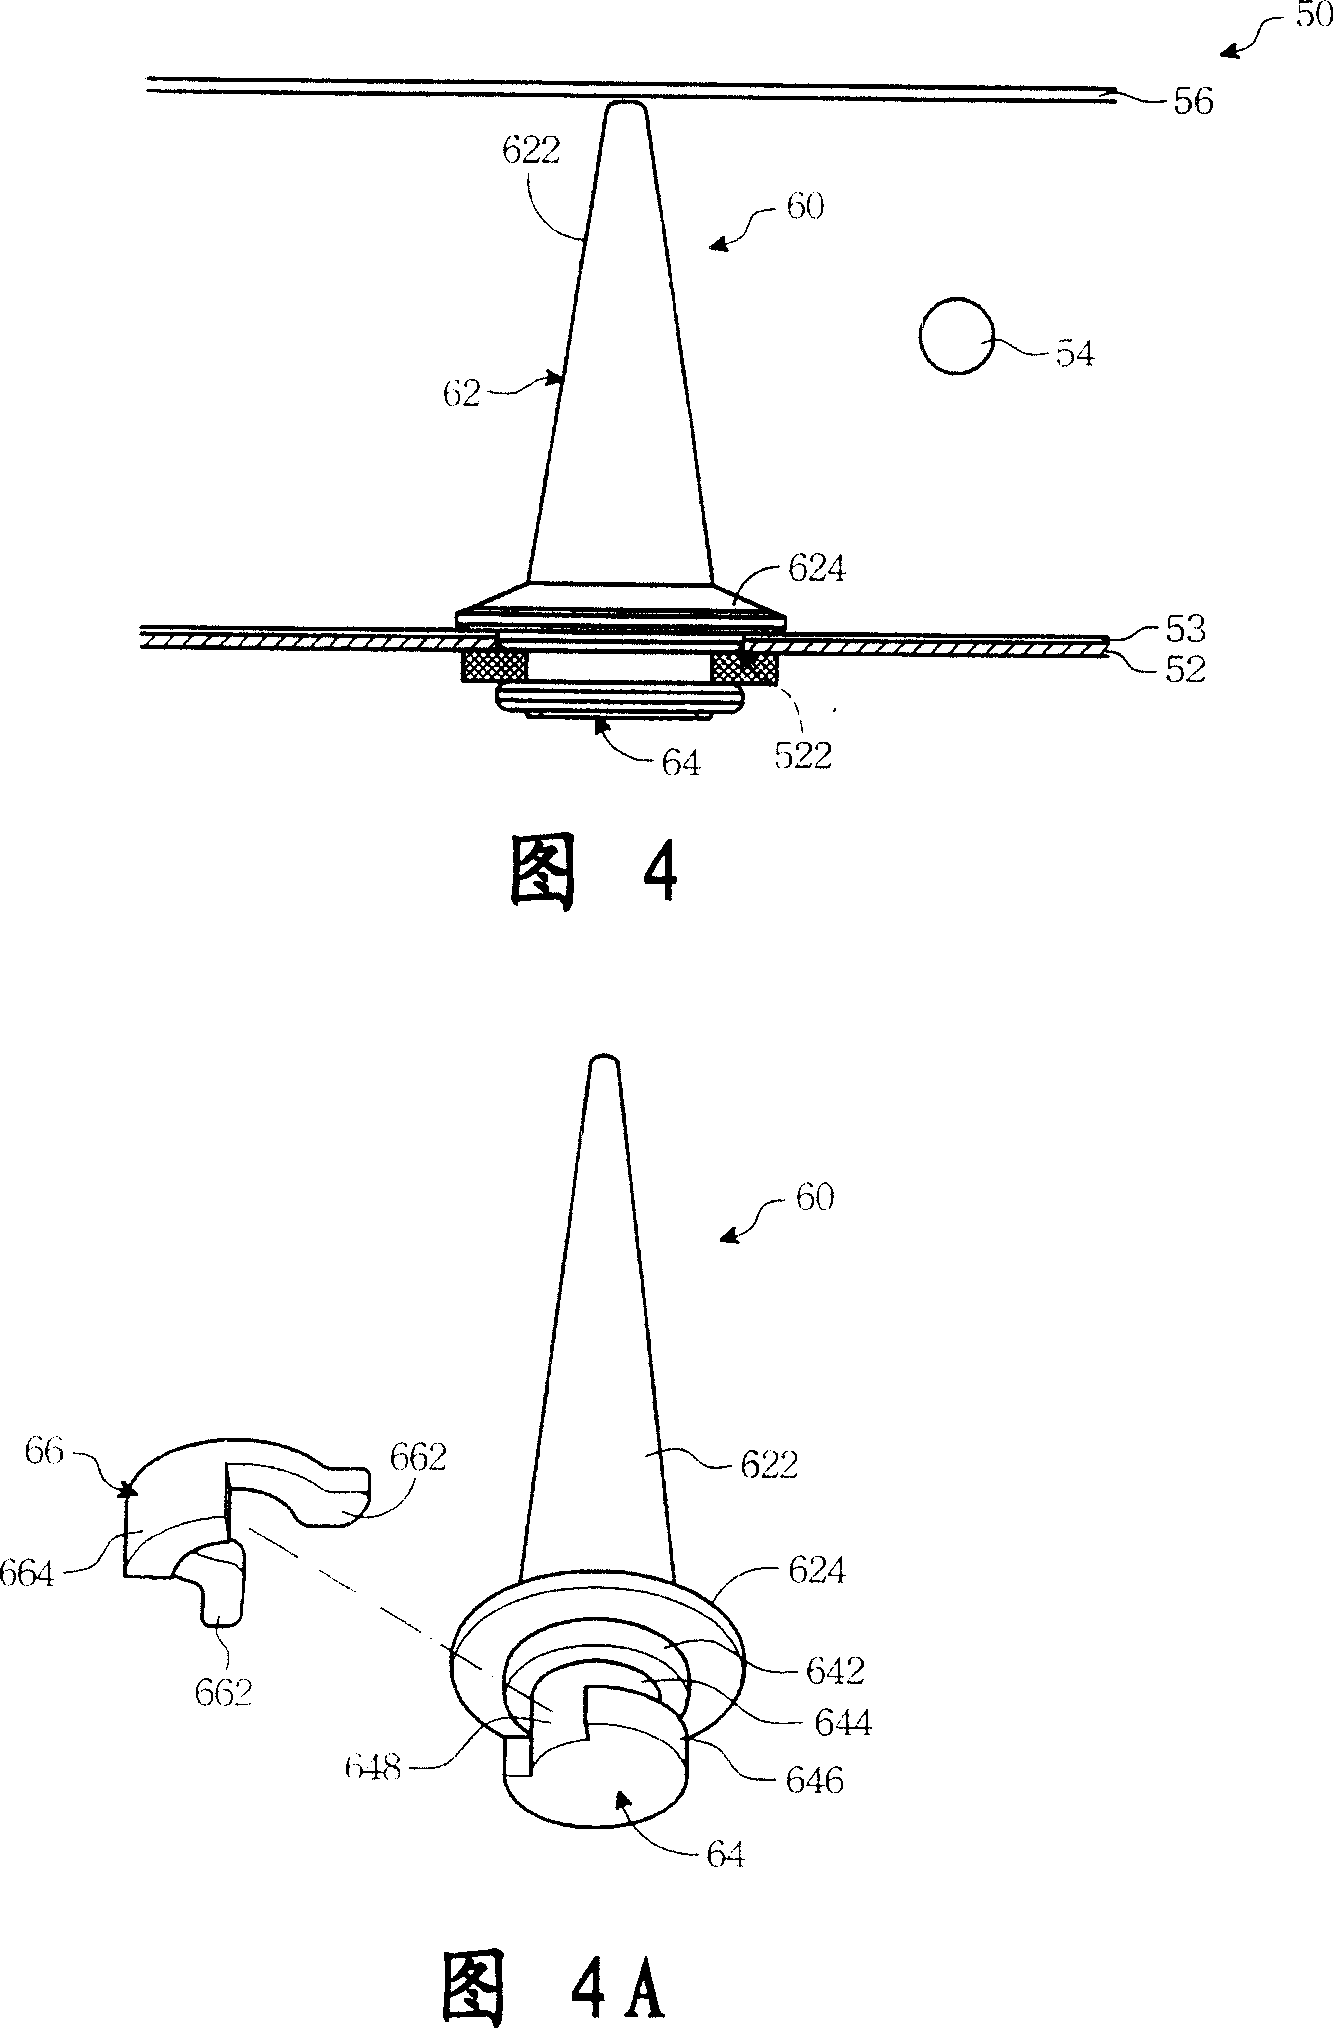 Direct downward optical background modular set and its supporting posts